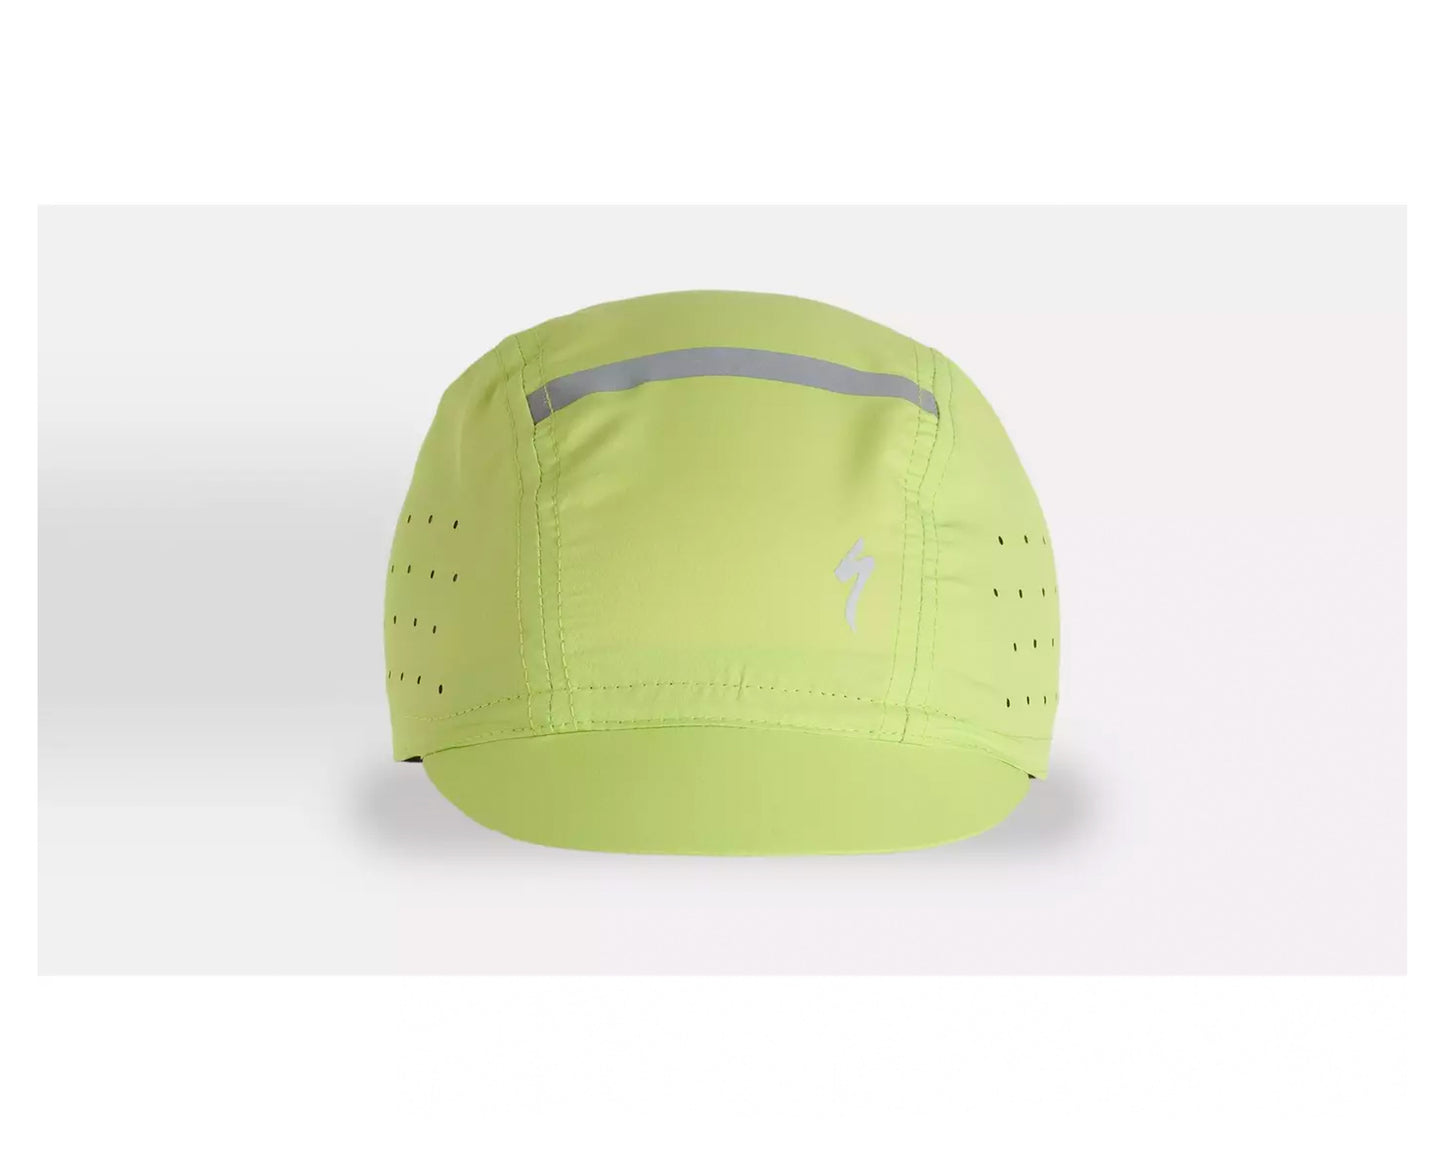 Specialized Reflect Cycling Cap